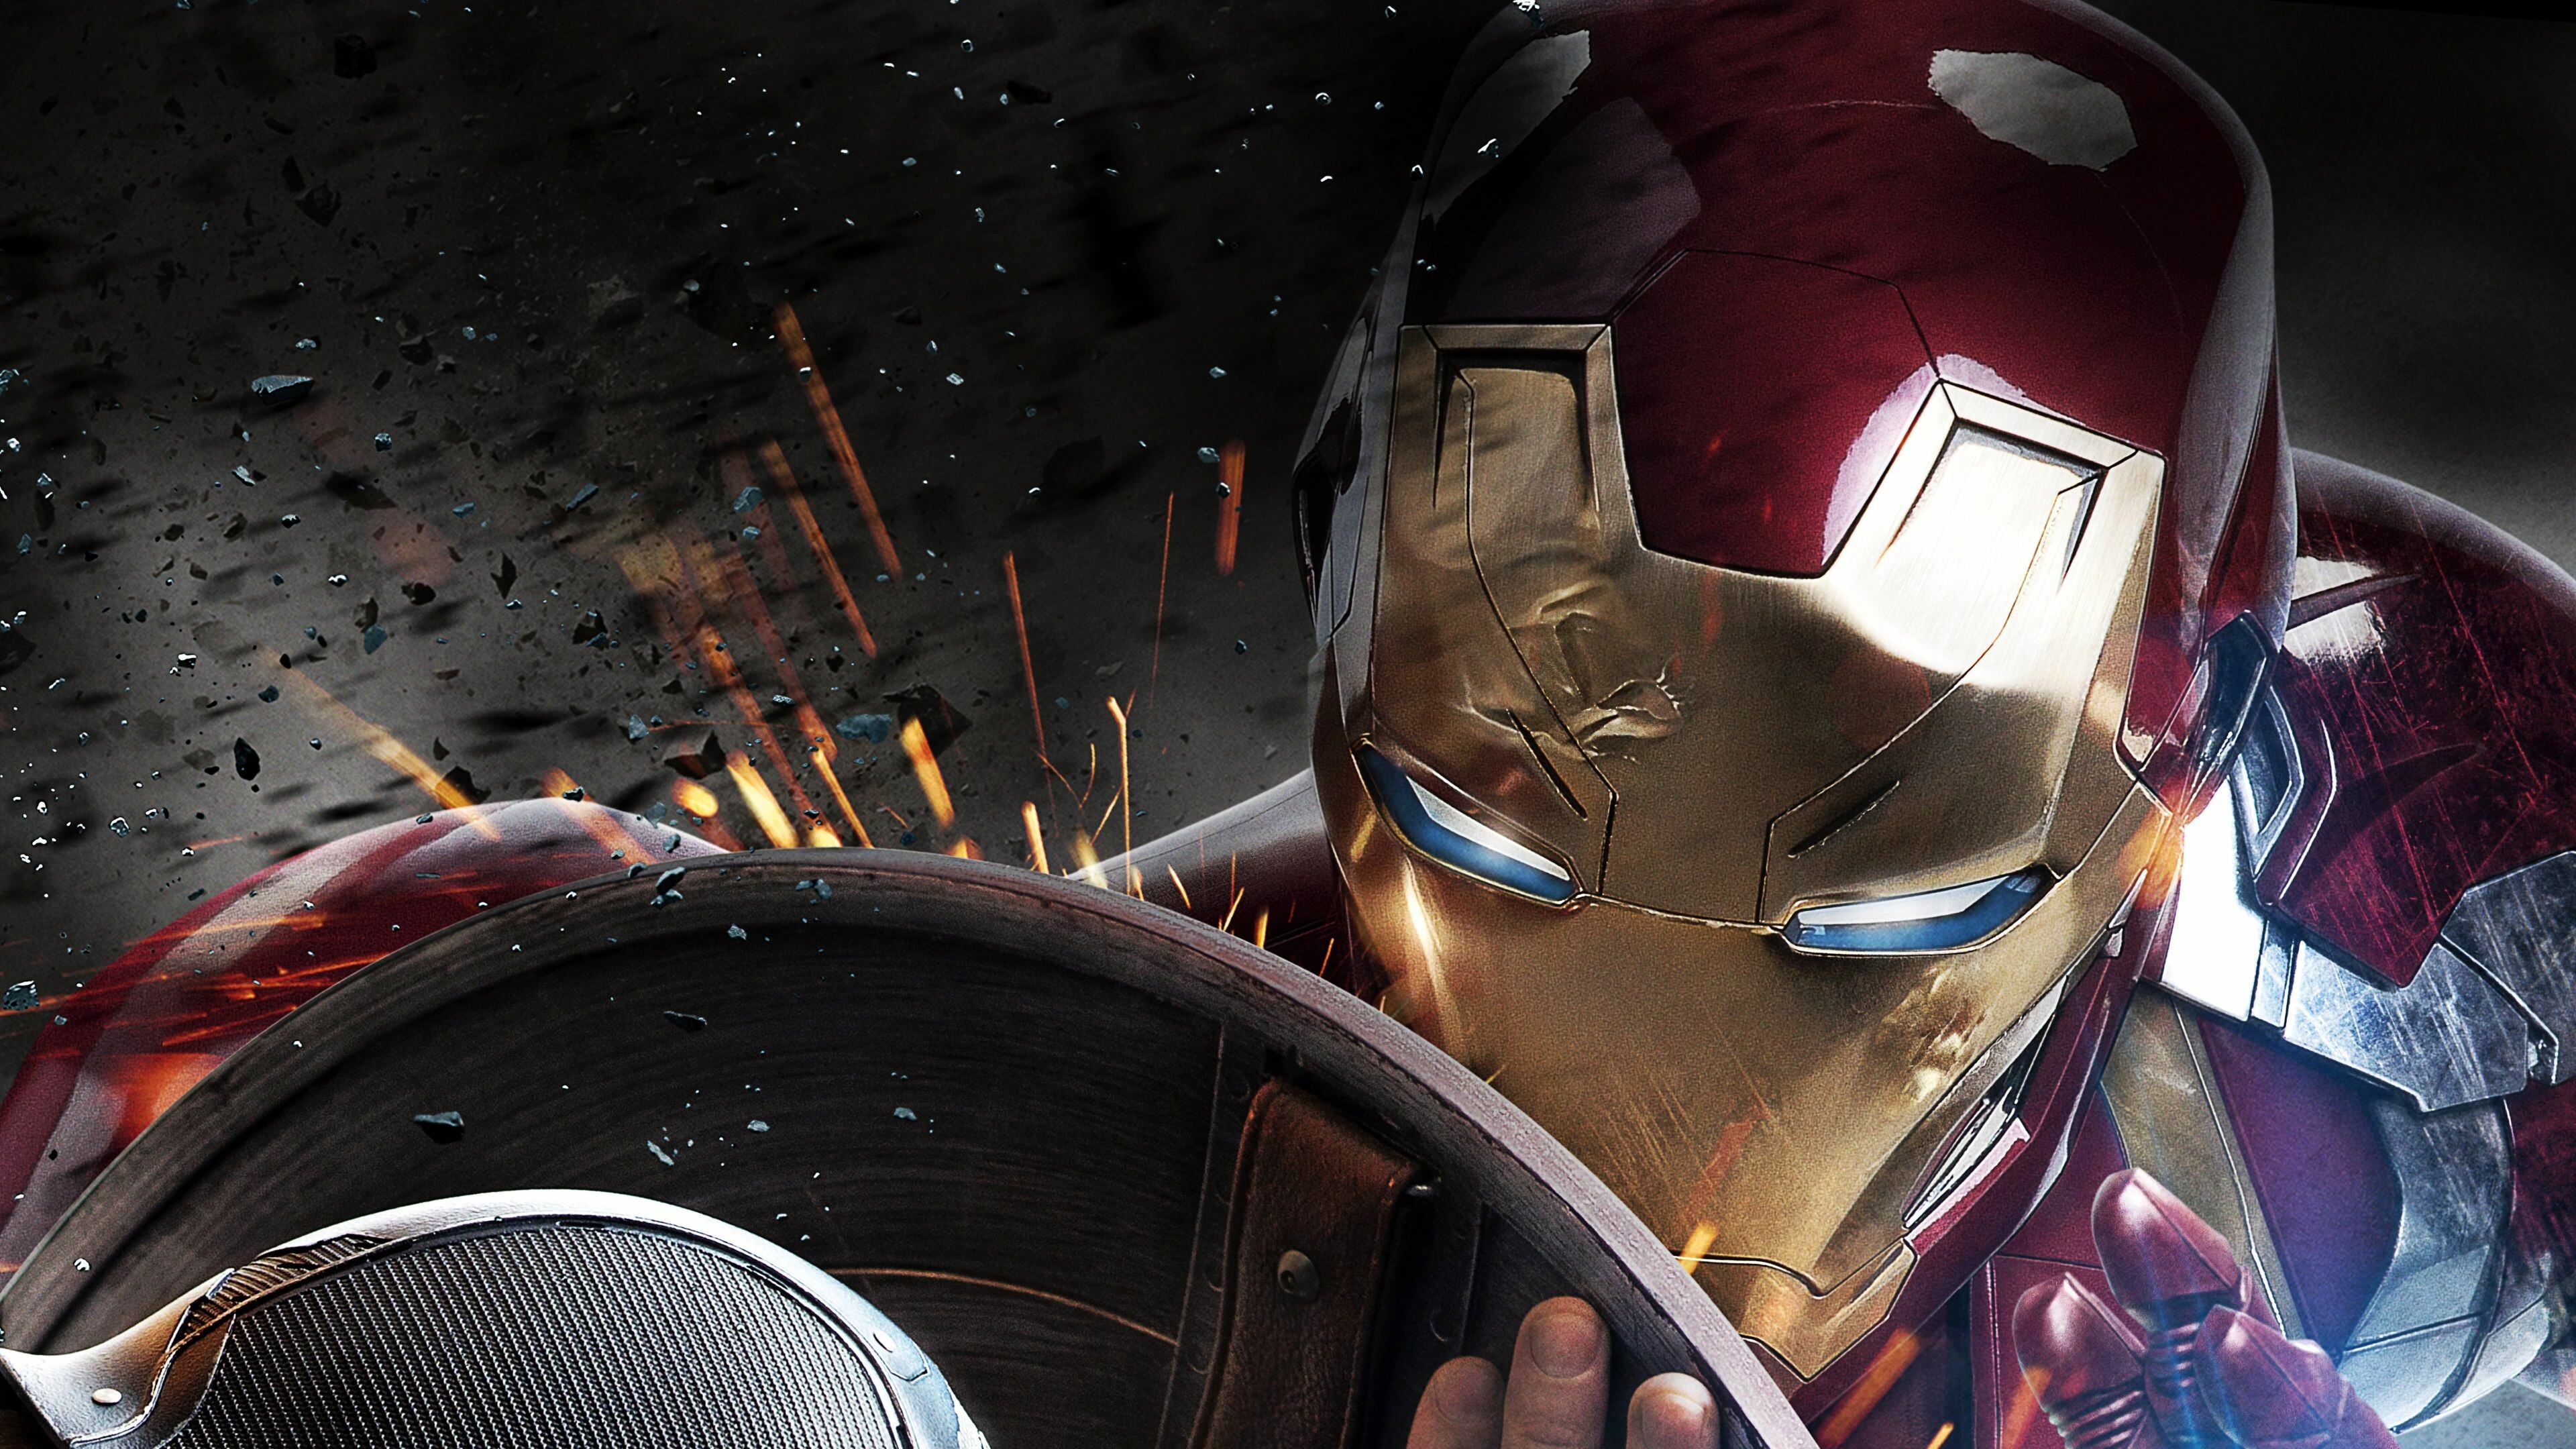 Marvel: Iron Man, received his own title in Iron Man #1 on May 1968. 3840x2160 4K Wallpaper.